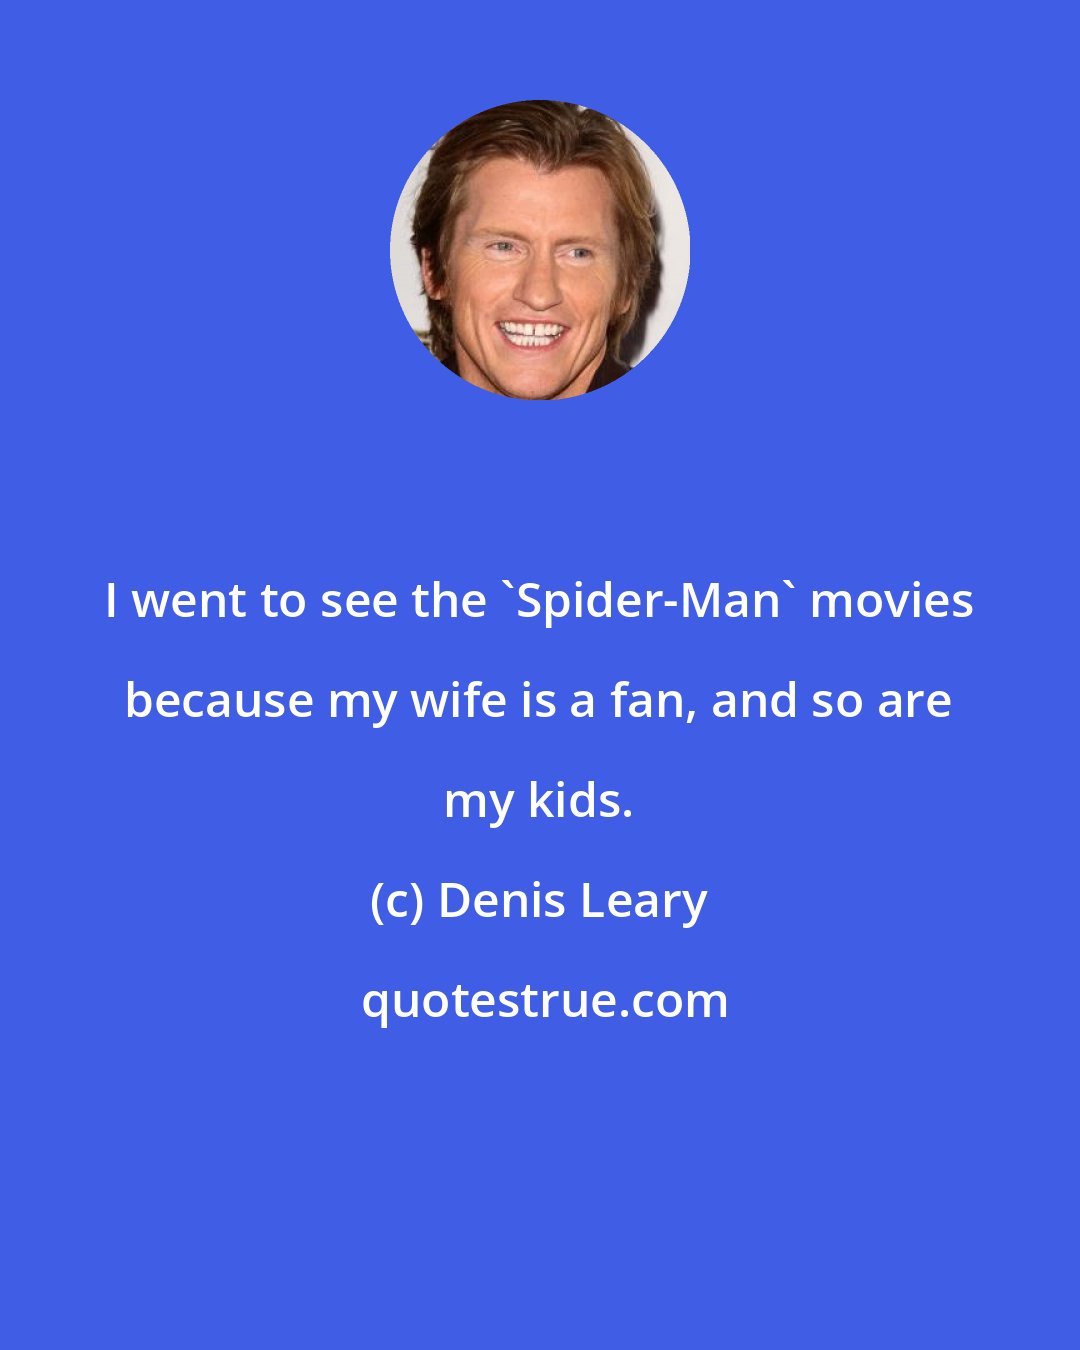 Denis Leary: I went to see the 'Spider-Man' movies because my wife is a fan, and so are my kids.